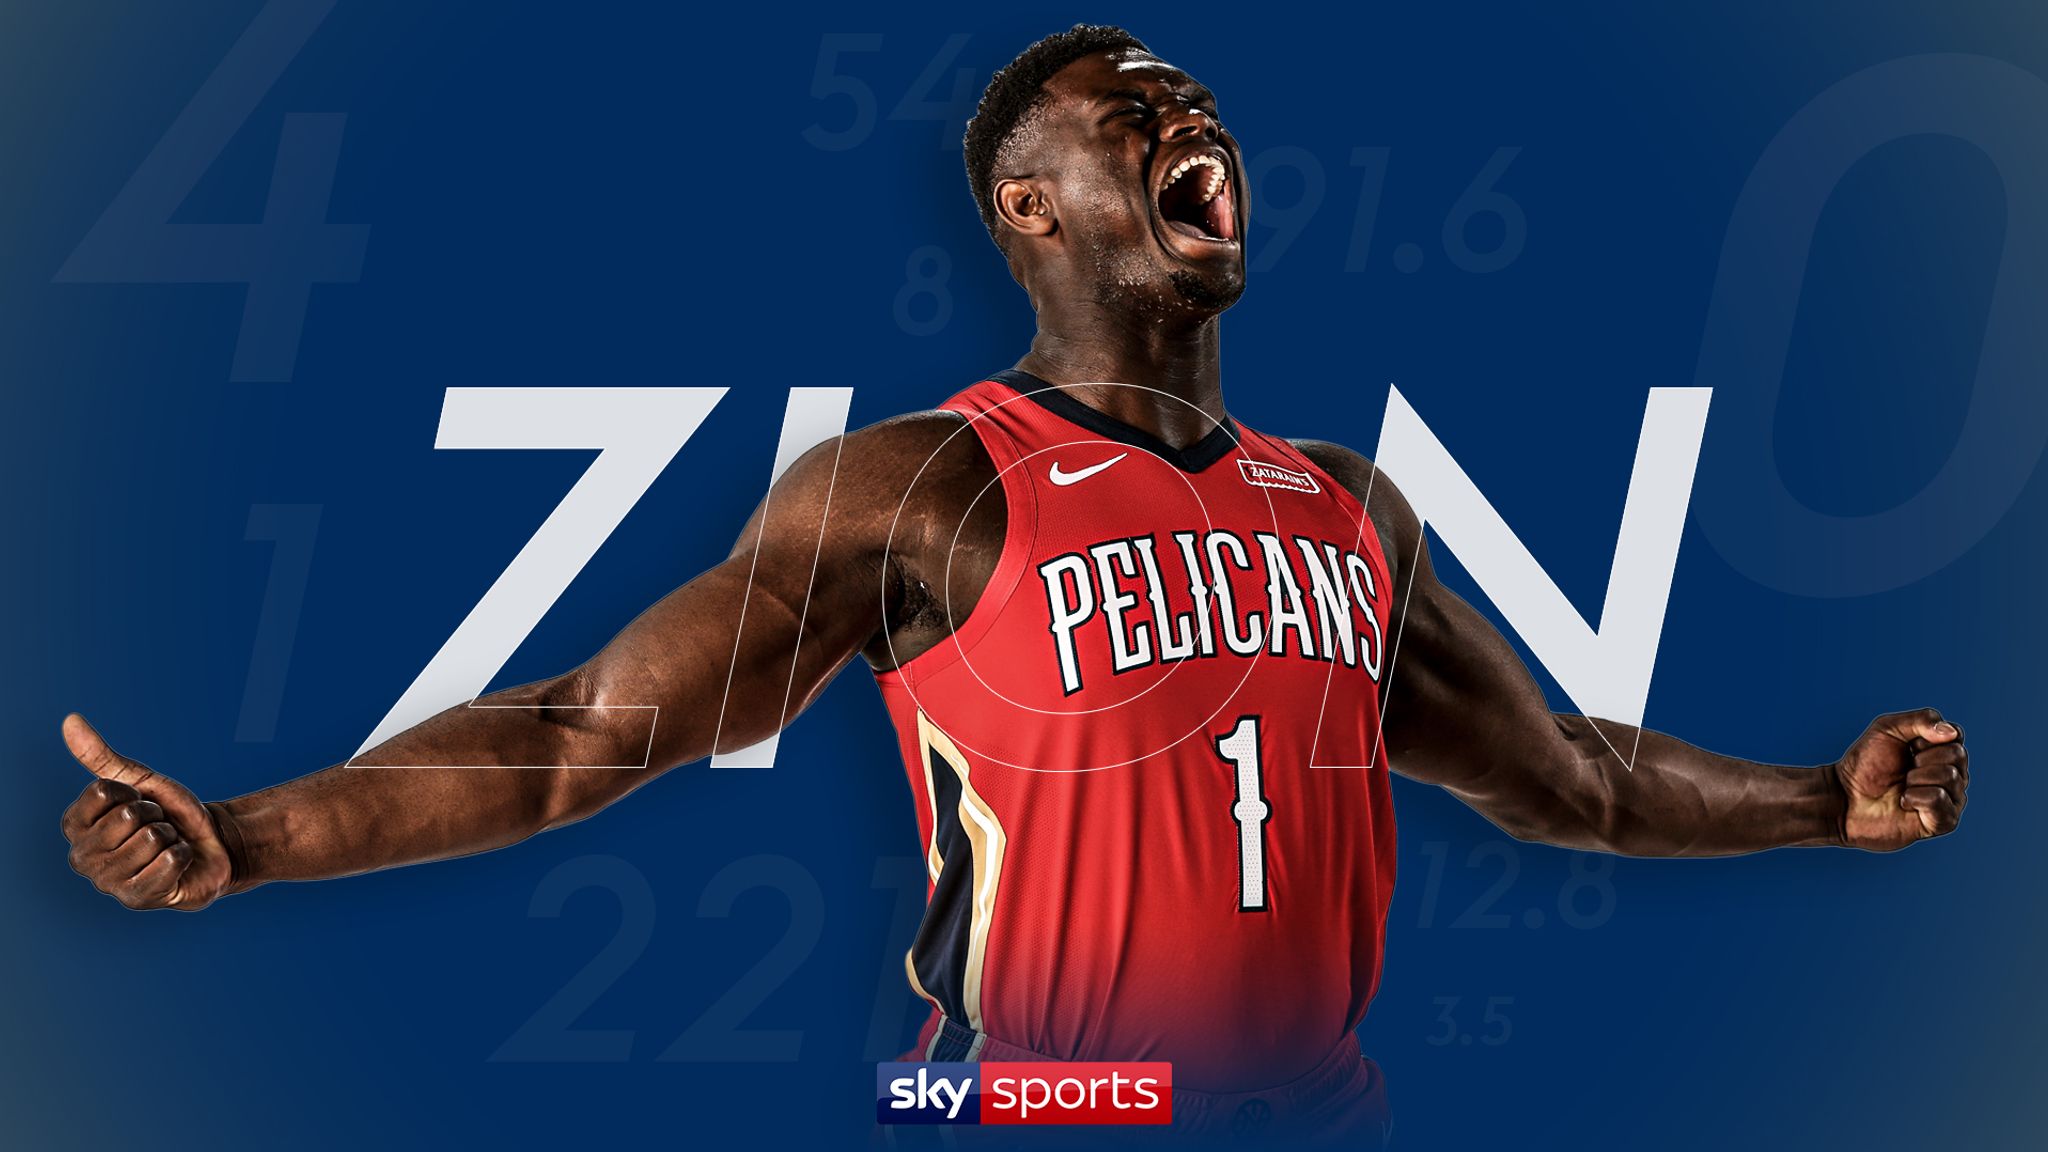 New Orleans Pelicans: All-Star Zion Williamson joins elite group